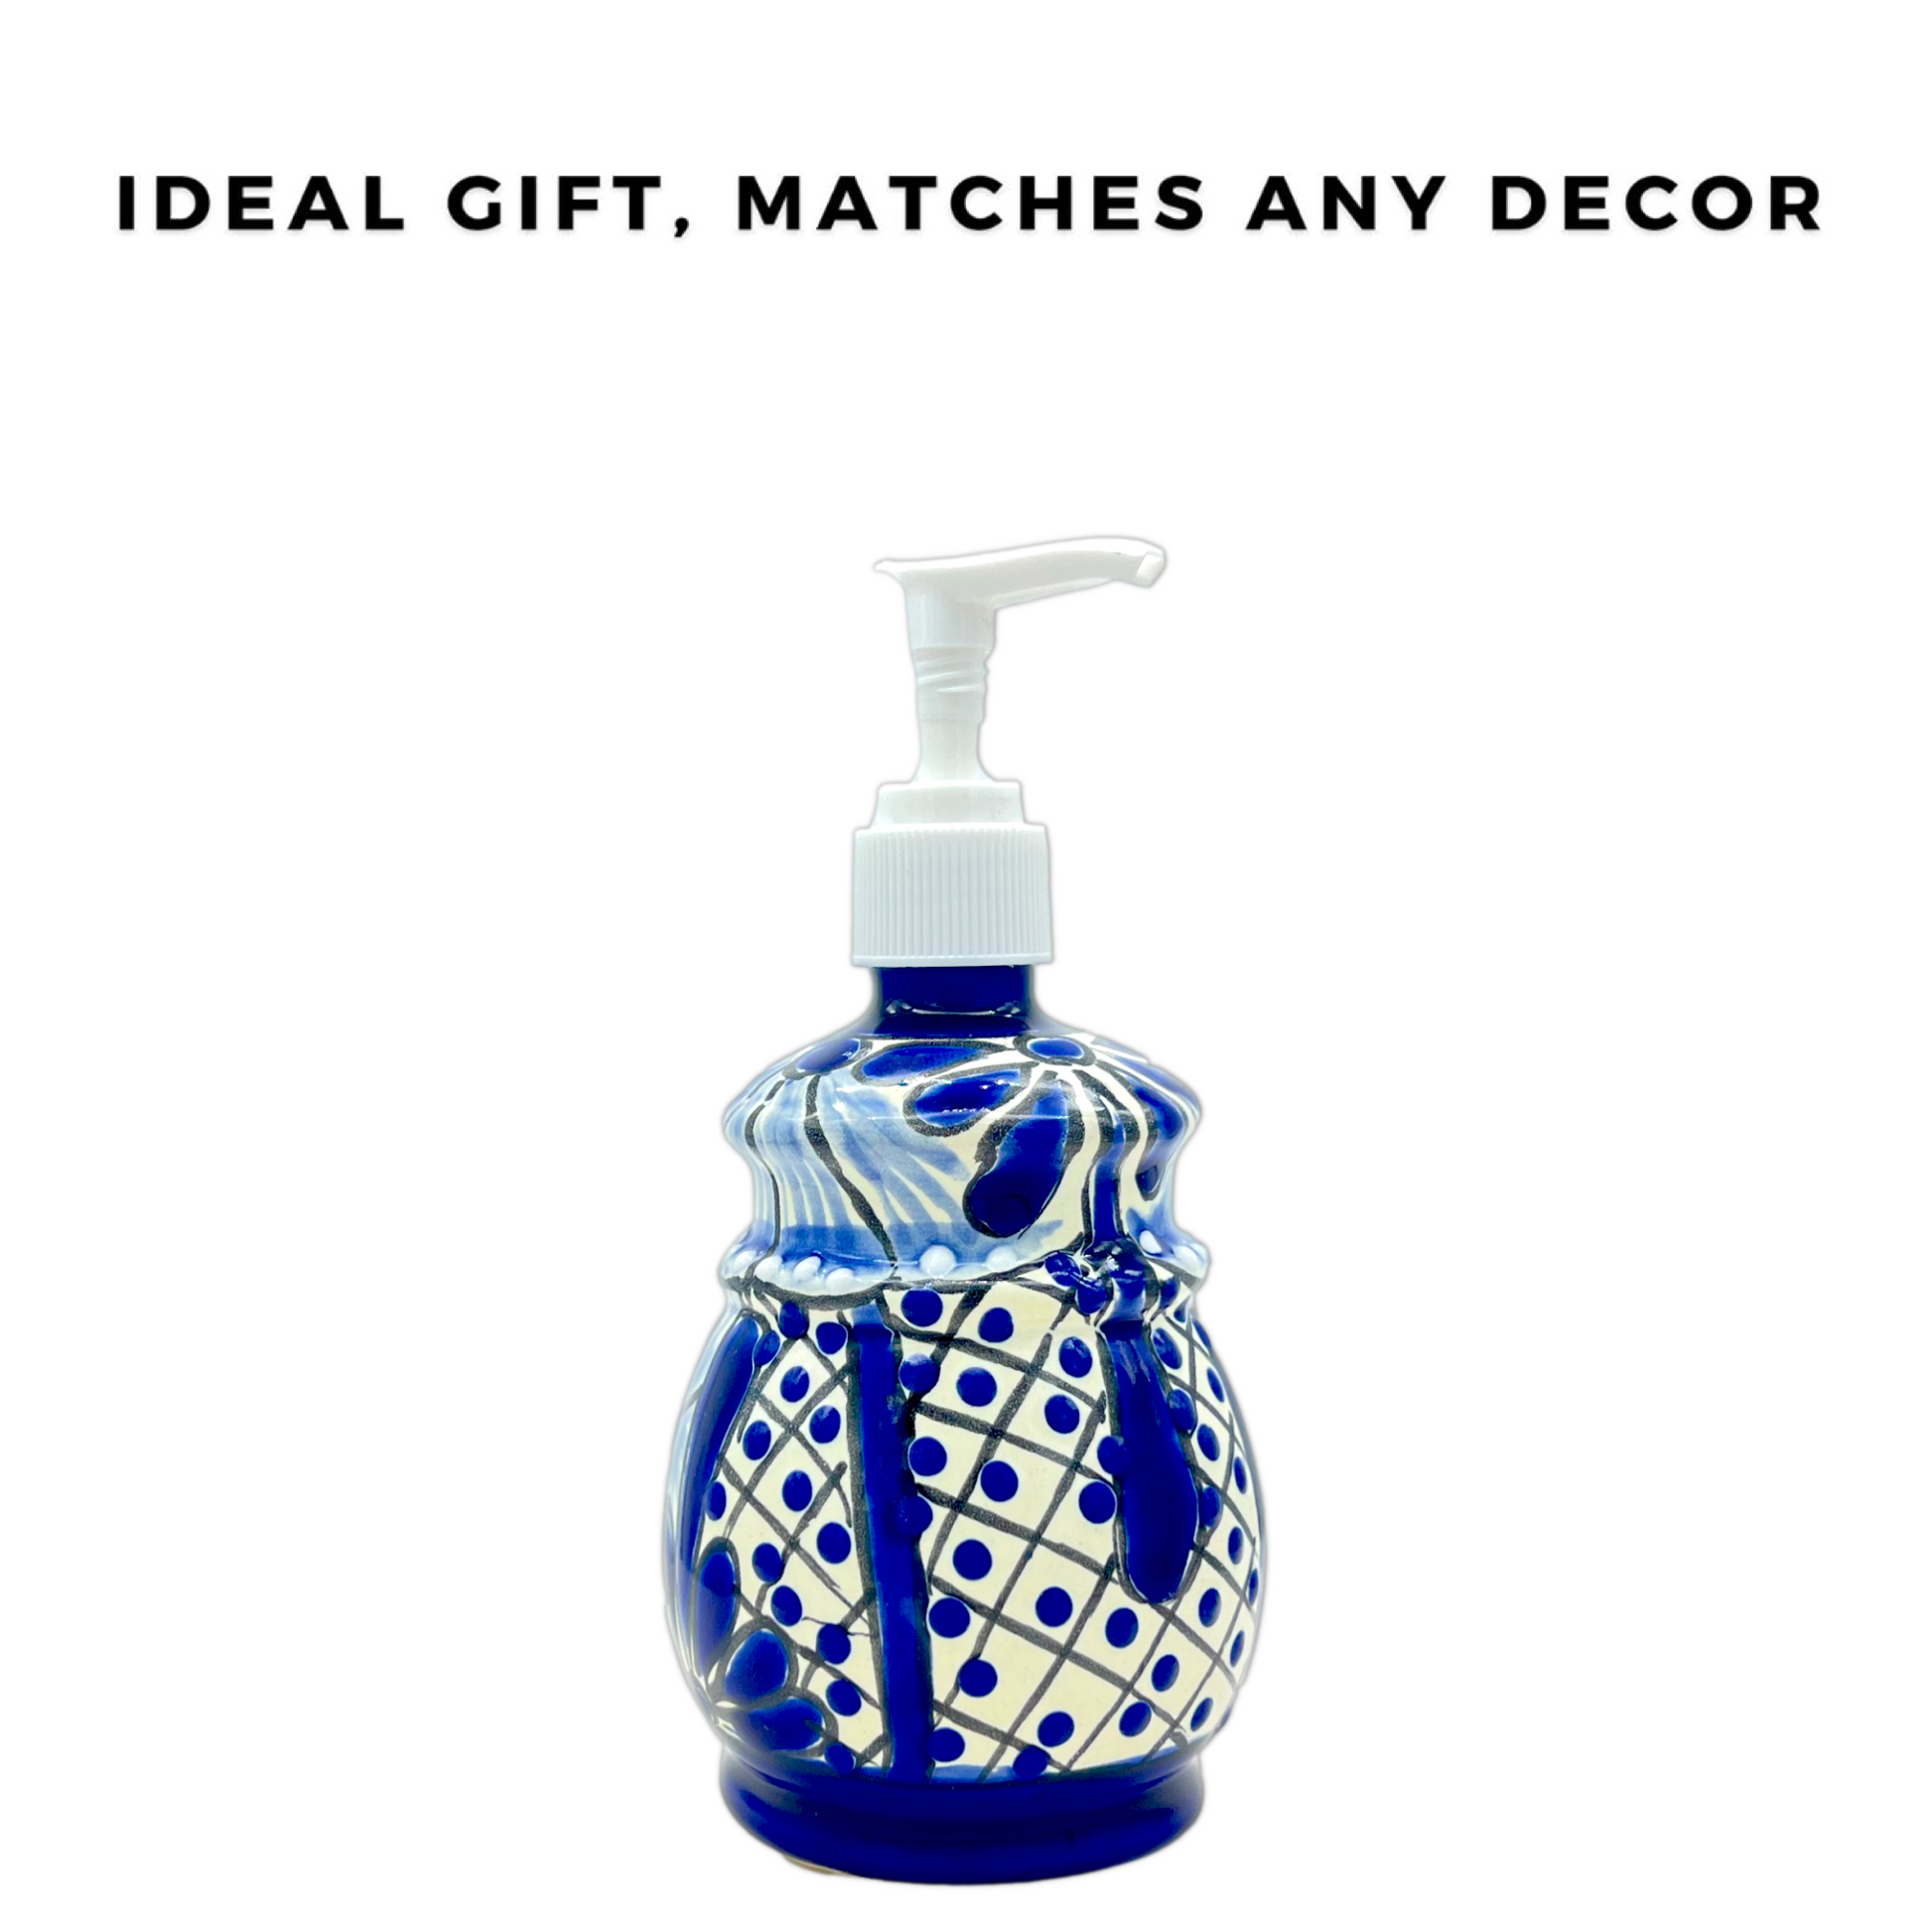 Hand-painted Talavera Ceramic Soap Dispenser in blue and white, a unique addition to kitchen or bathroom decor is an ideal gift